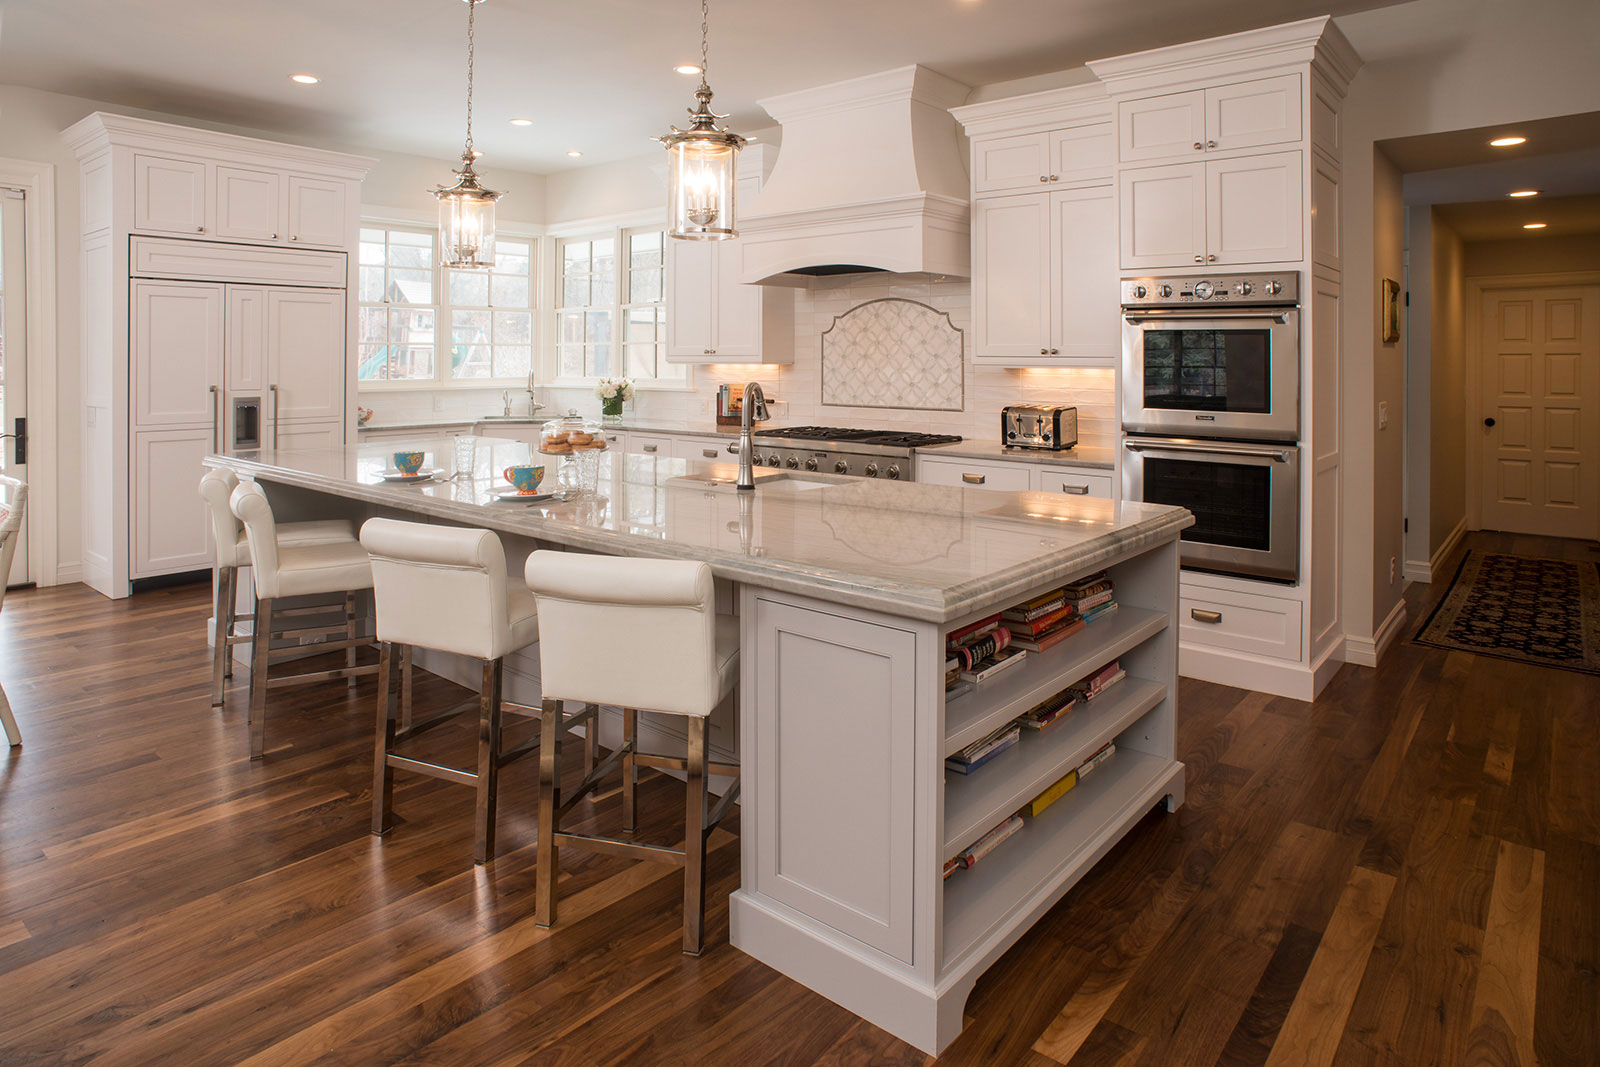 White Kitchen with Light Grey Island - Crystal Cabinets